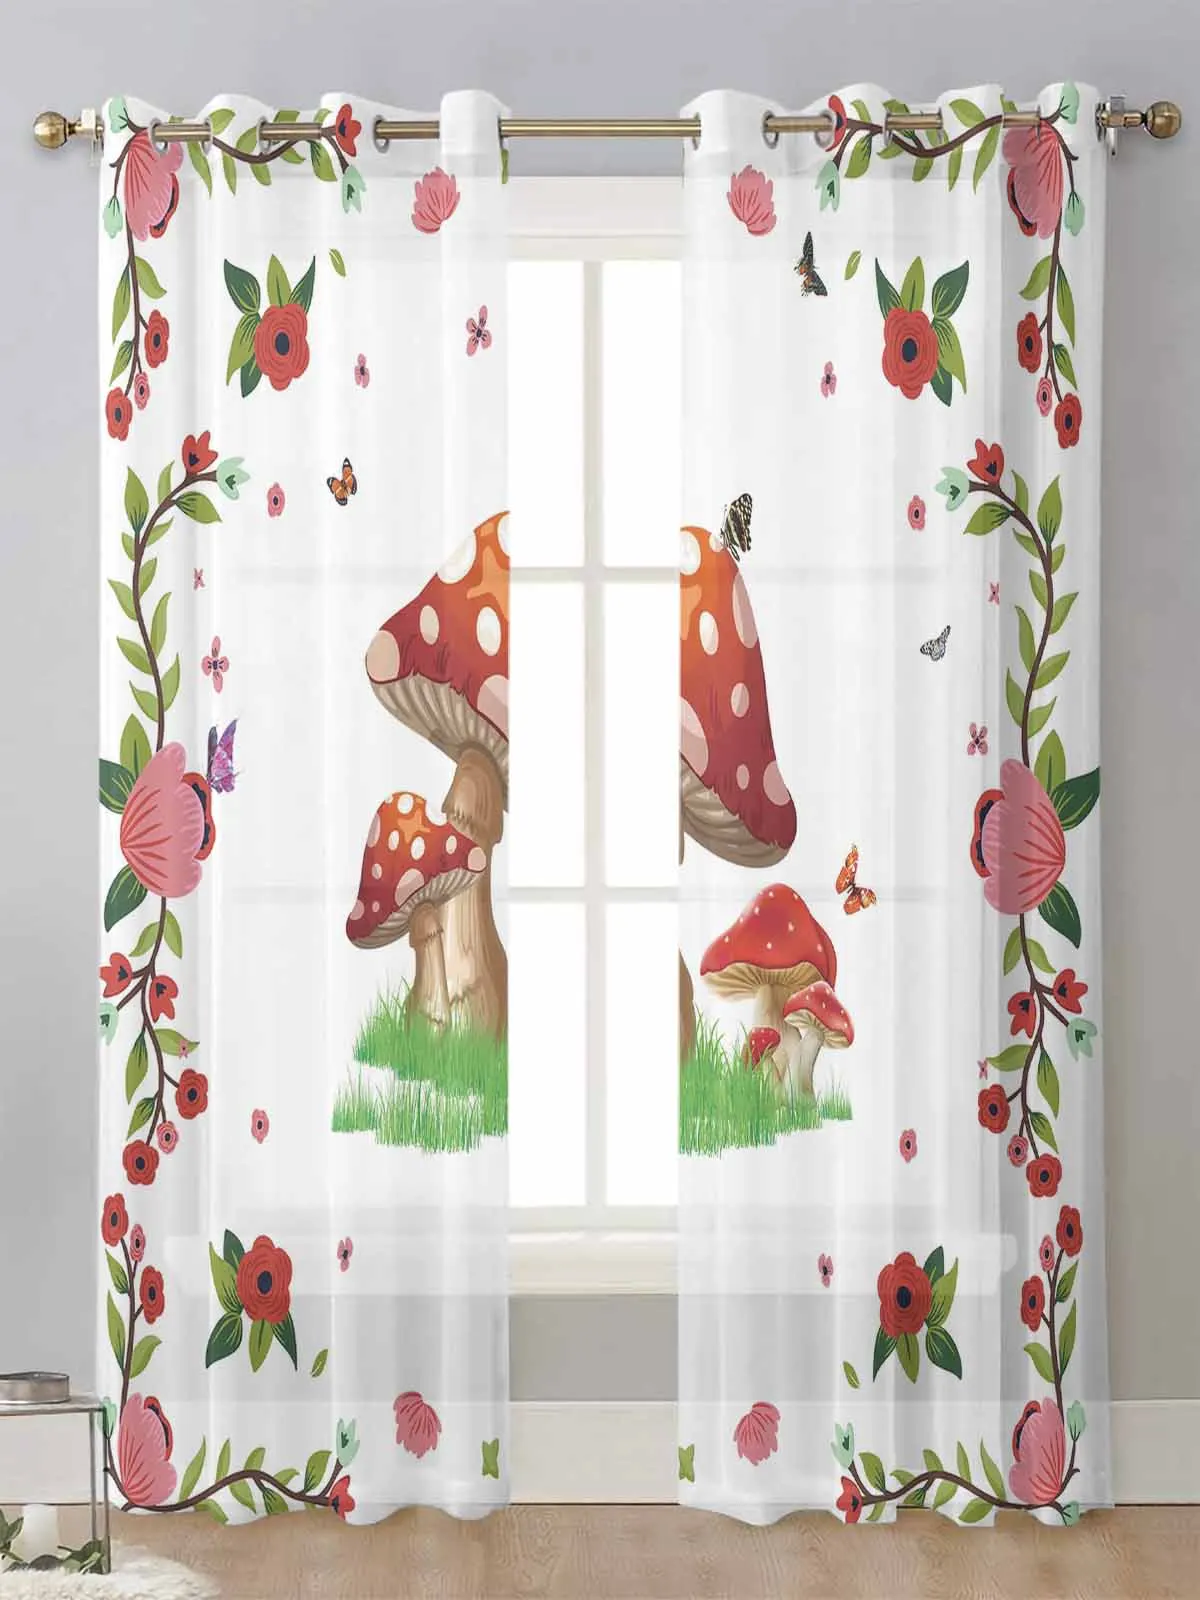 

Flower Butterfly Mushroom Sheer Curtains For Living Room Window Transparent Voile Tulle Curtain Cortinas Drapes Home Decor